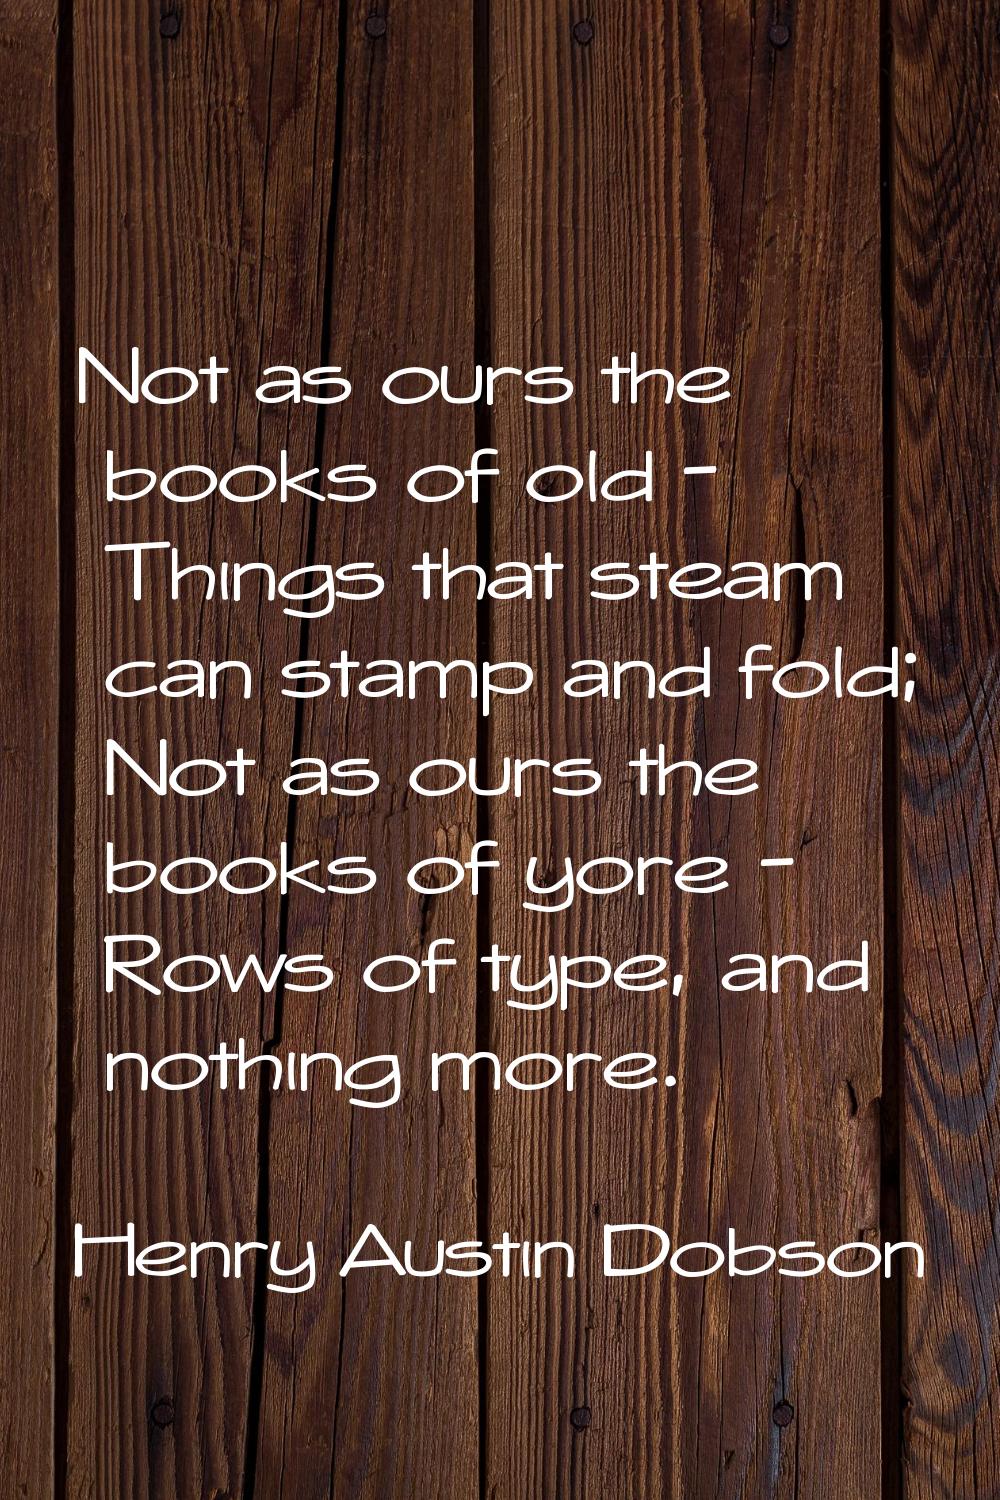 Not as ours the books of old - Things that steam can stamp and fold; Not as ours the books of yore 